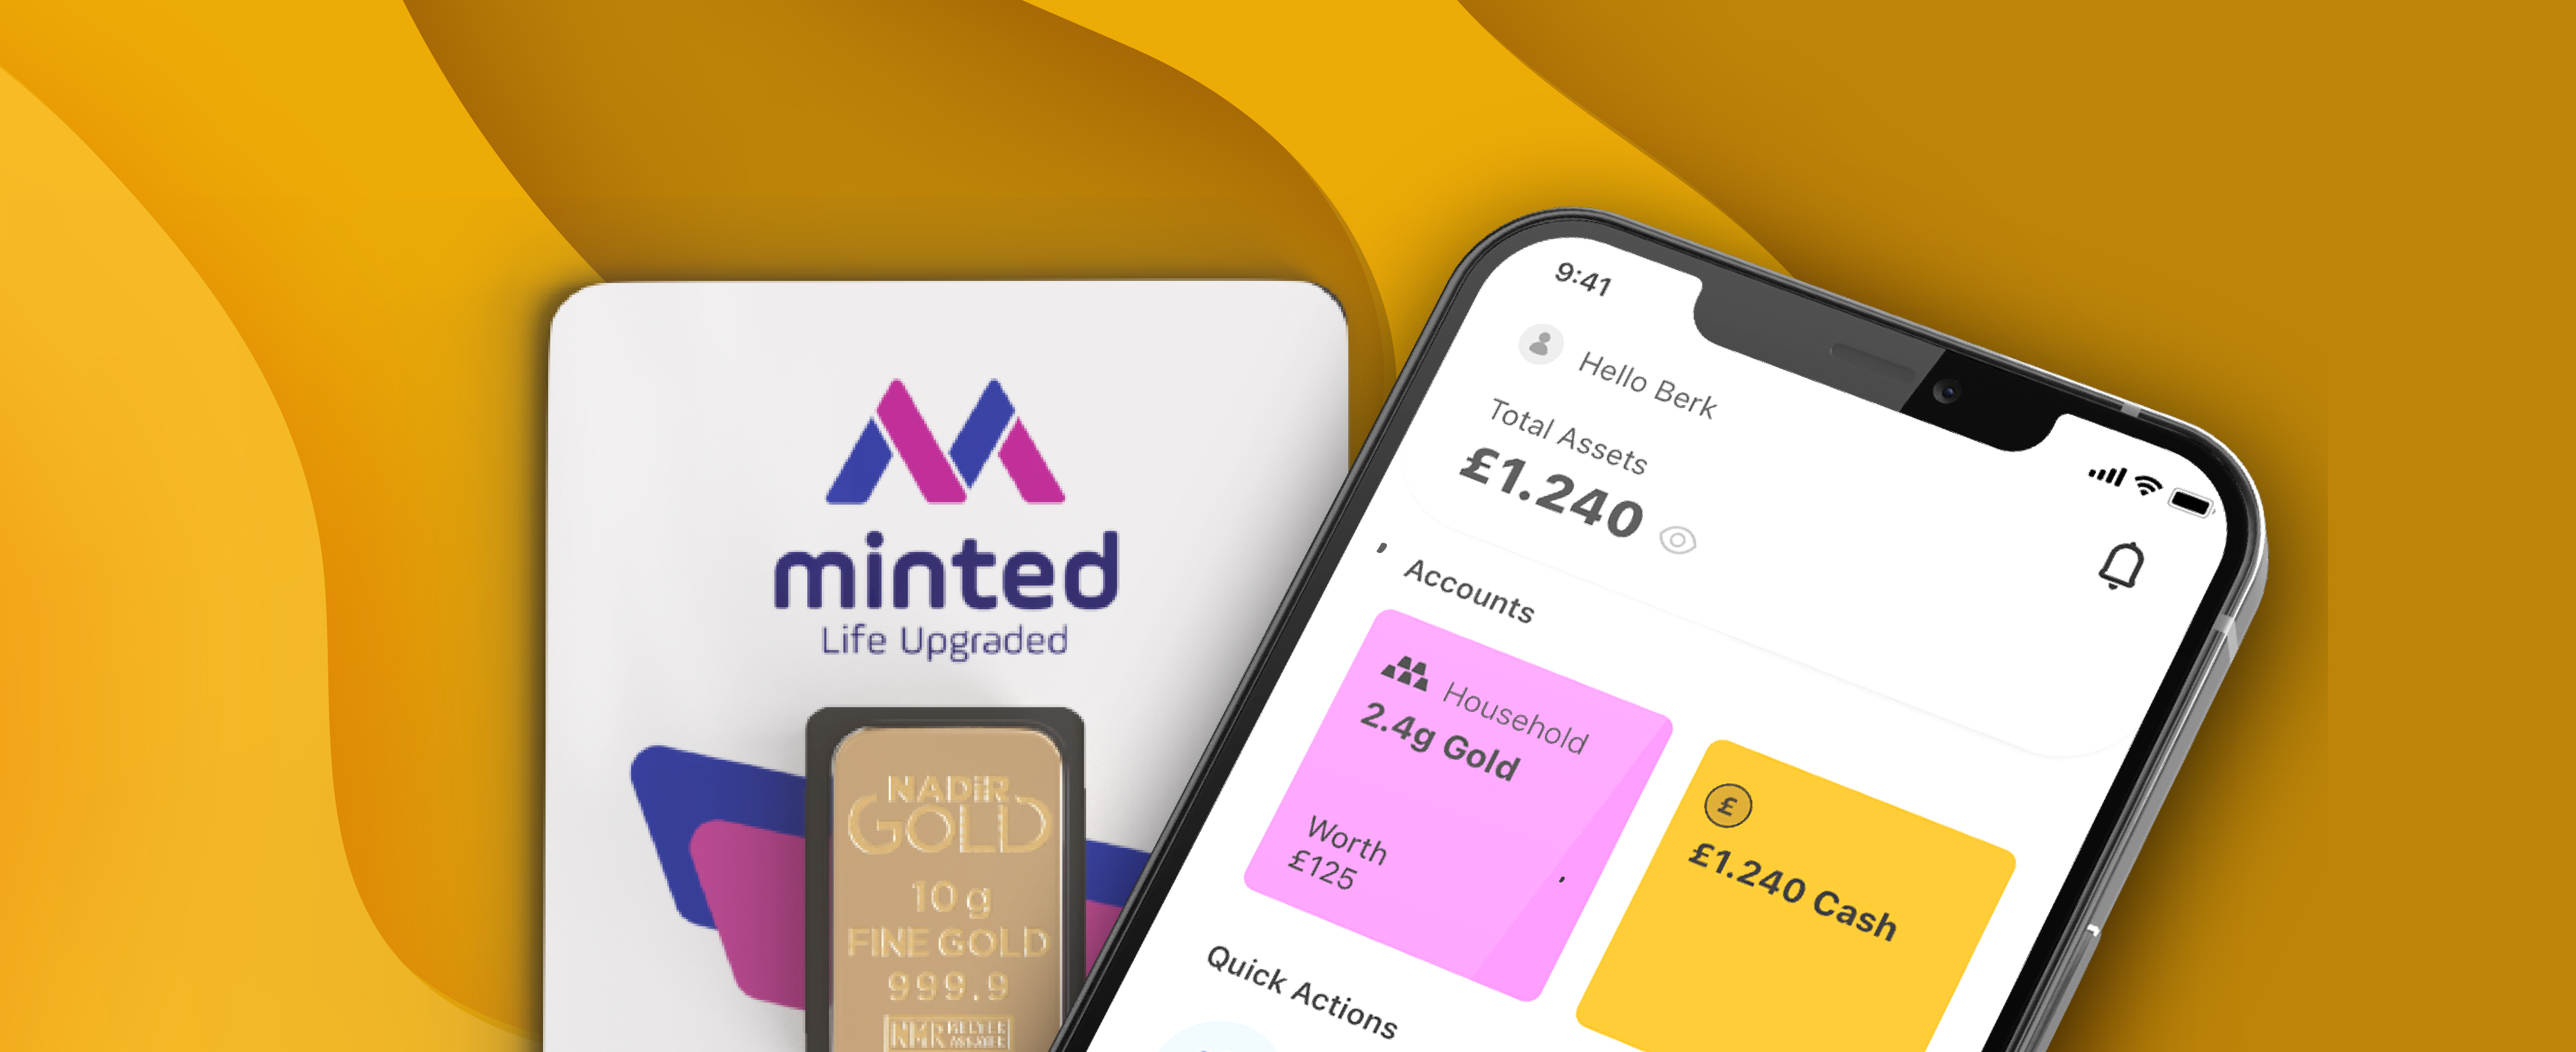 The Minted App Features